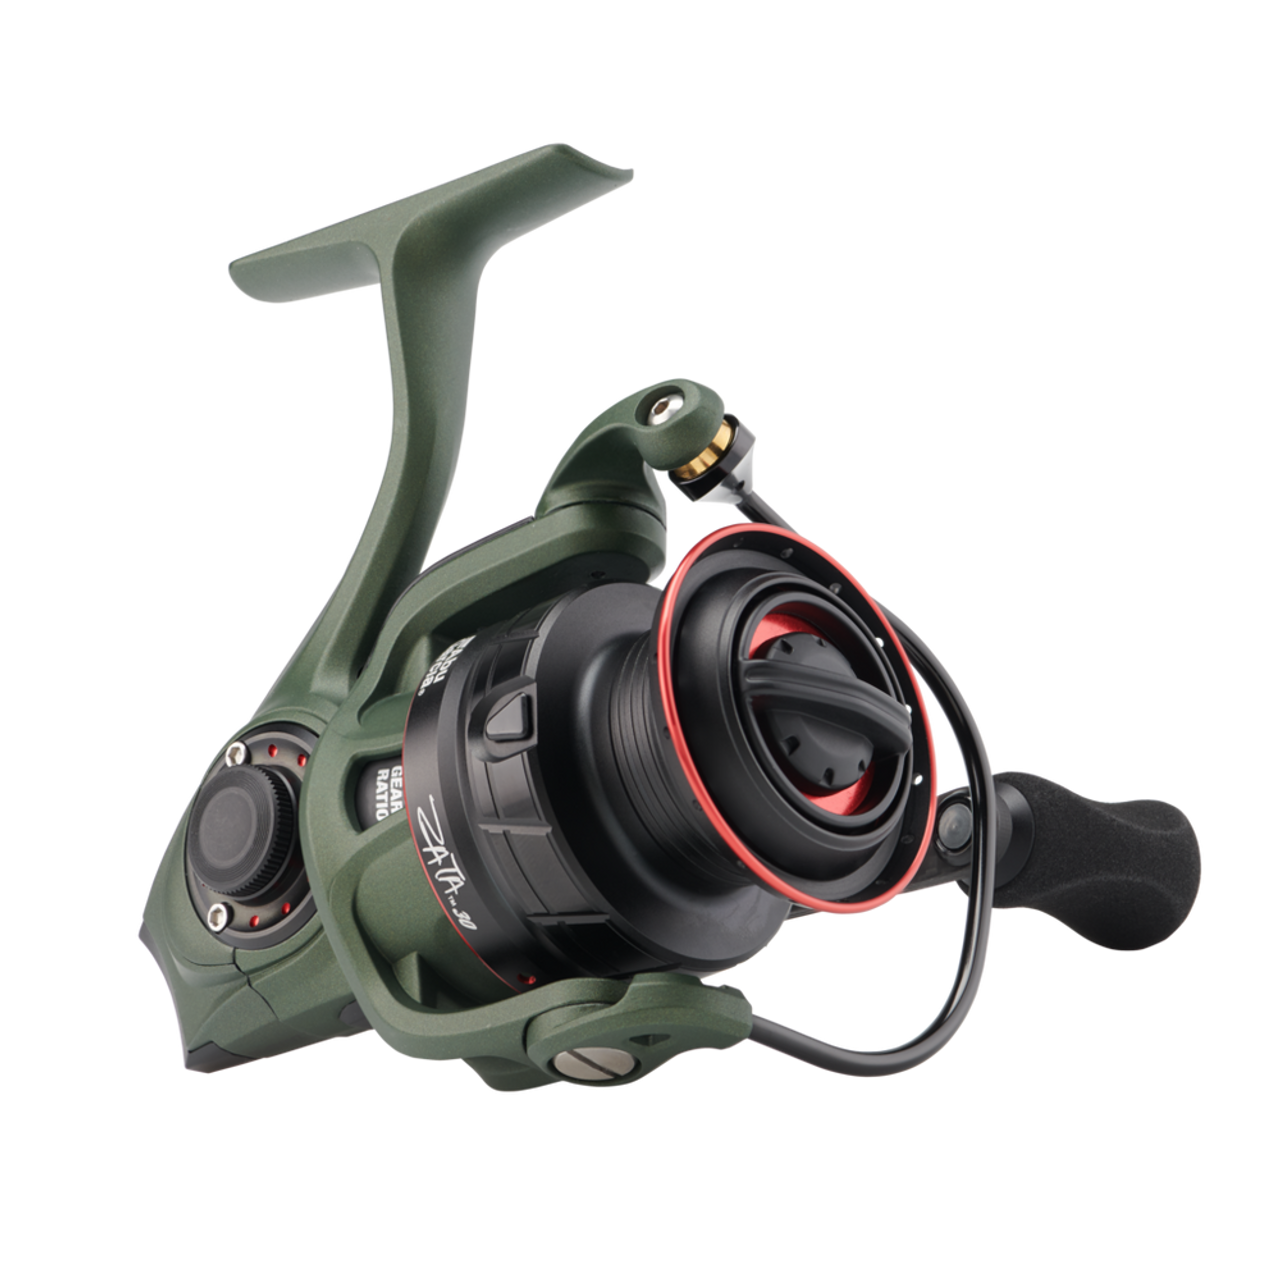 https://cdn11.bigcommerce.com/s-uv5can9due/images/stencil/1280x1280/products/33084/234464/Abu_Garcia_Zata_Spinning_Reel_2020_alt1_w_1000&h_1000&img404_404&v_1__64143.1623353801.png?c=2